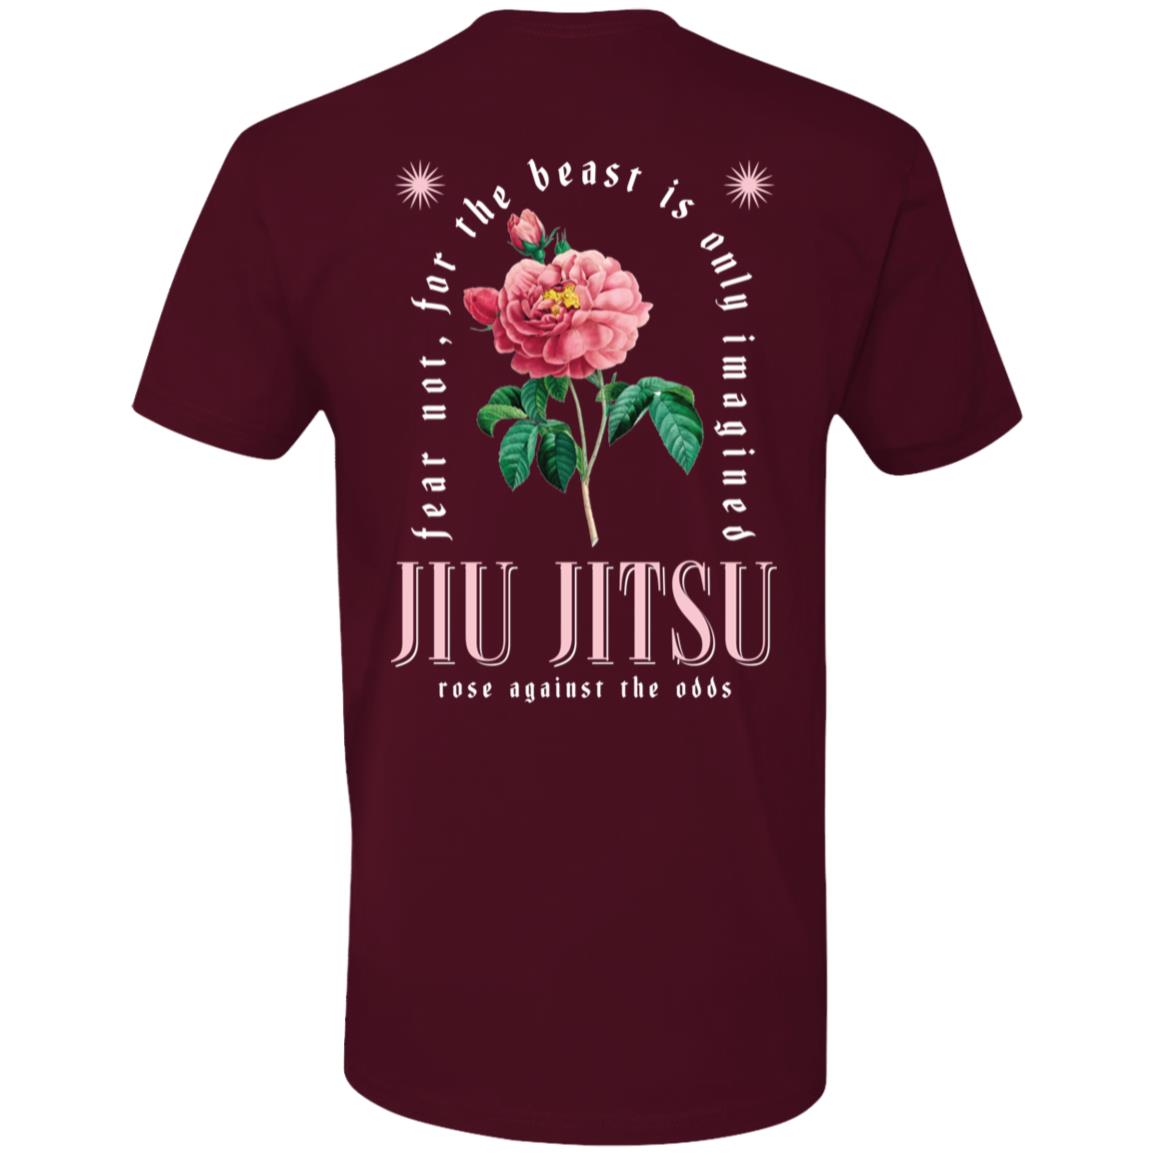 Maroon t-shirt with jiu-jitsu themed graphic and text "fear not for The Beast Is Only Imagined" and "rose against the odds".